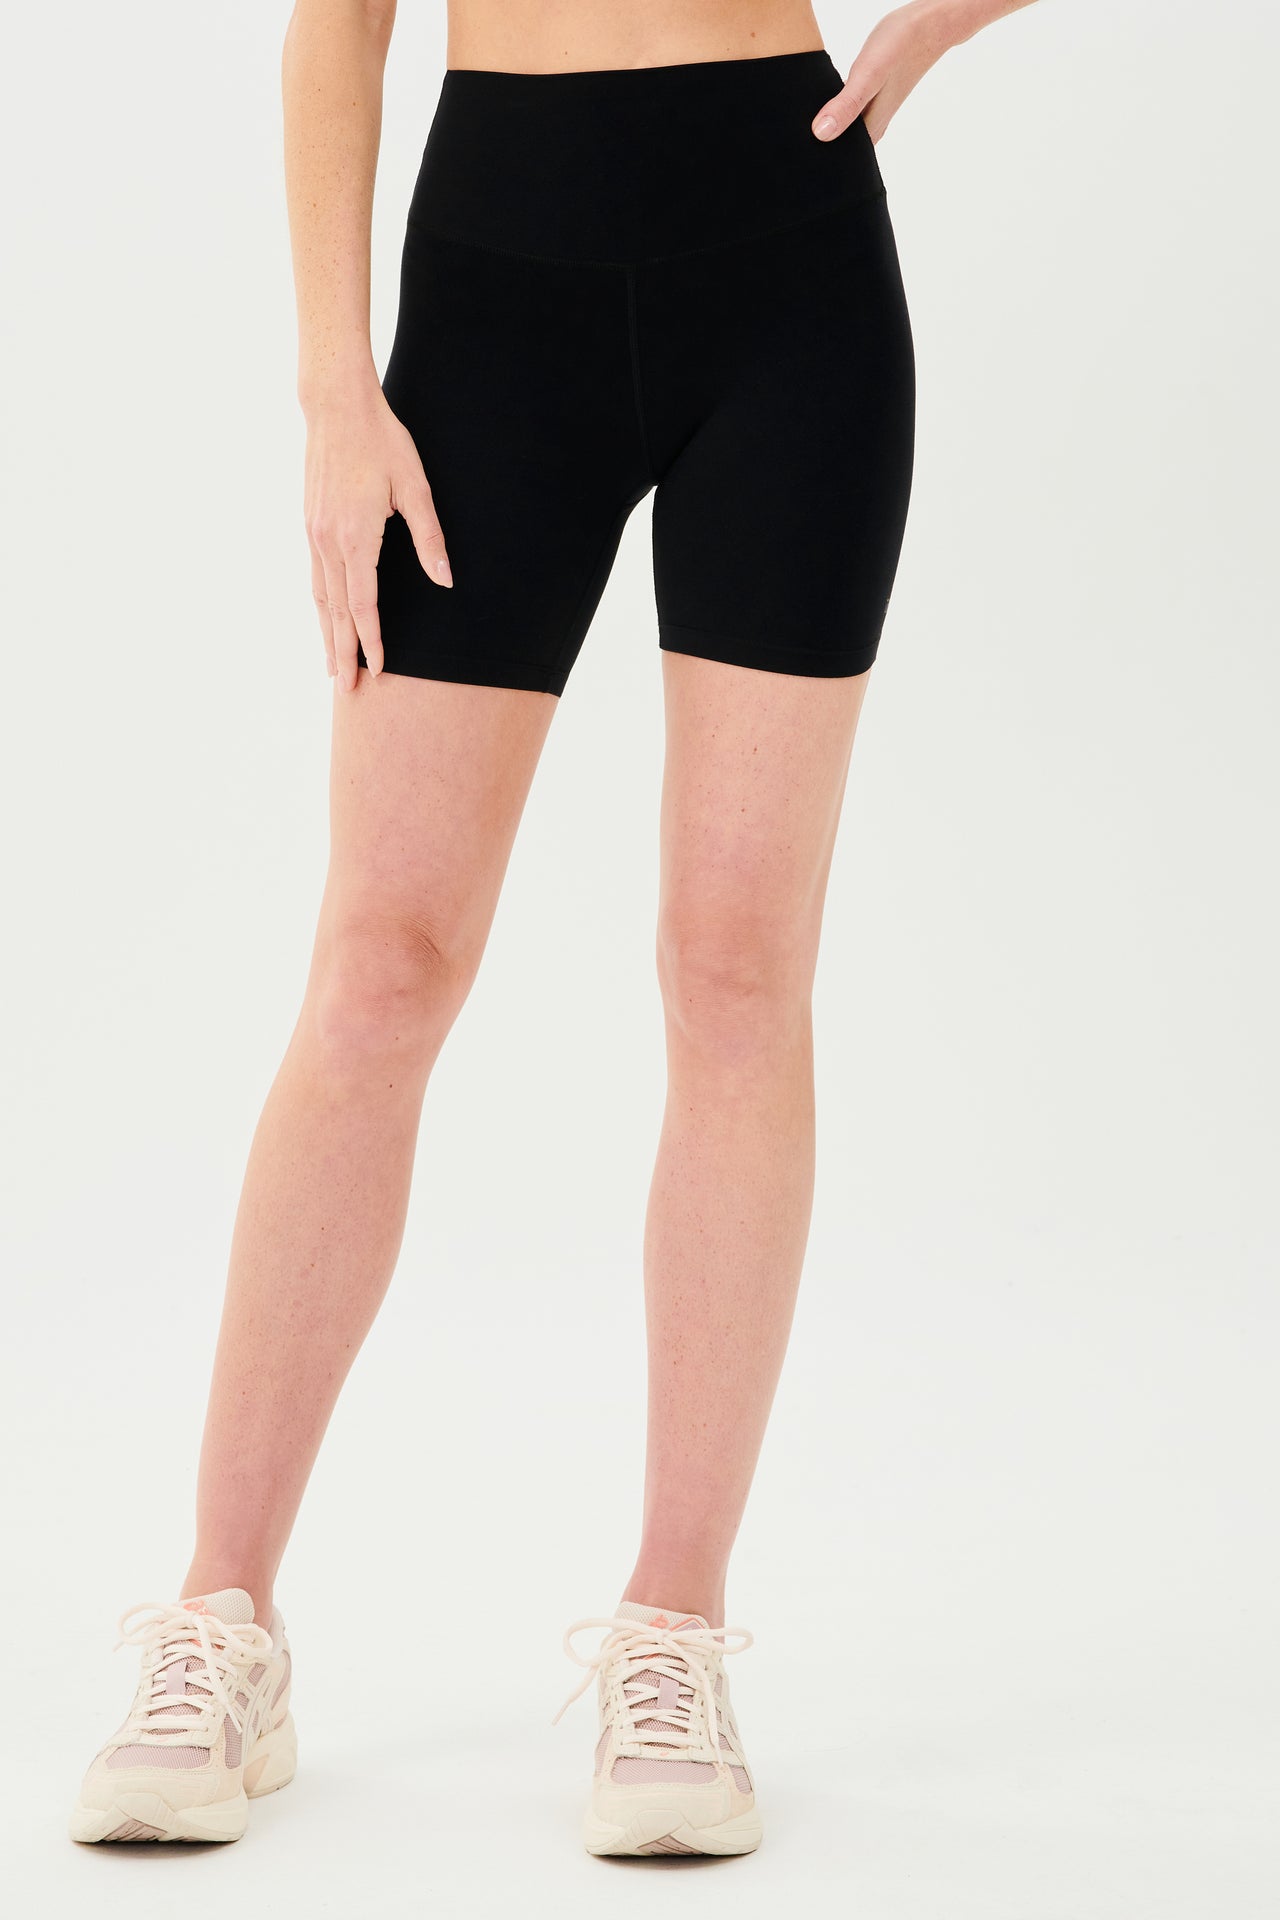 Front view of girl wearing highwaisted mid thigh black bike shorts with white shoes